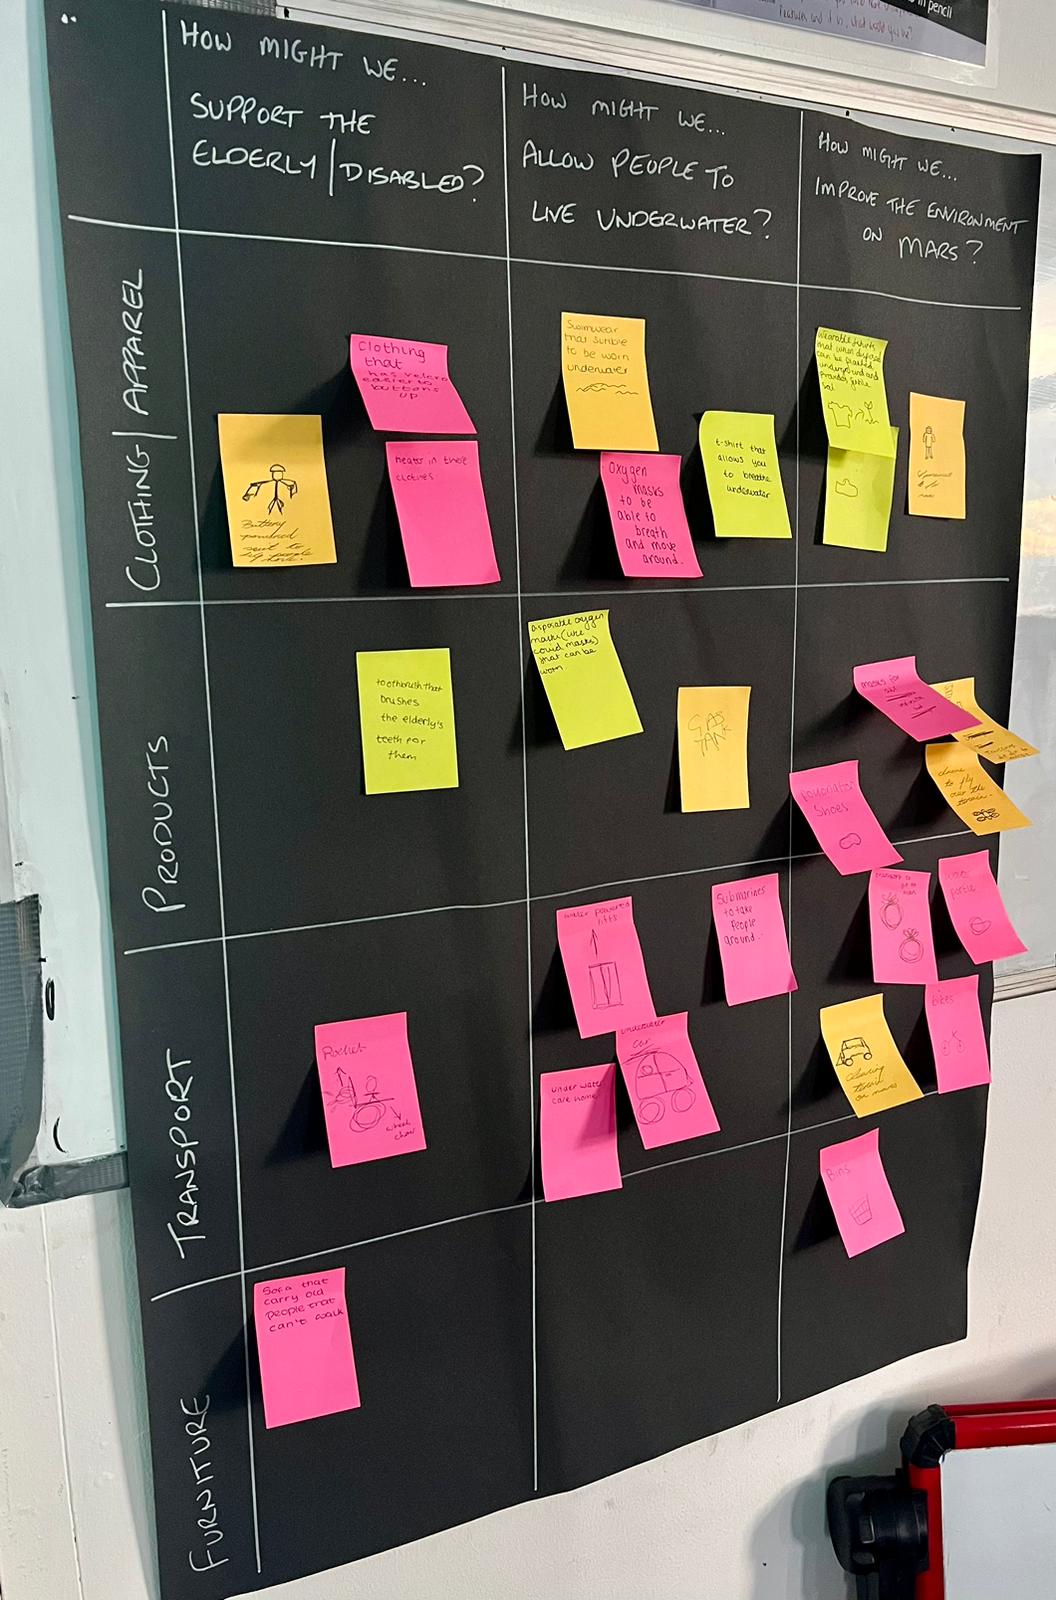 3 Traps to Avoid When Using Sticky Notes in Workshops, by Ben Crothers